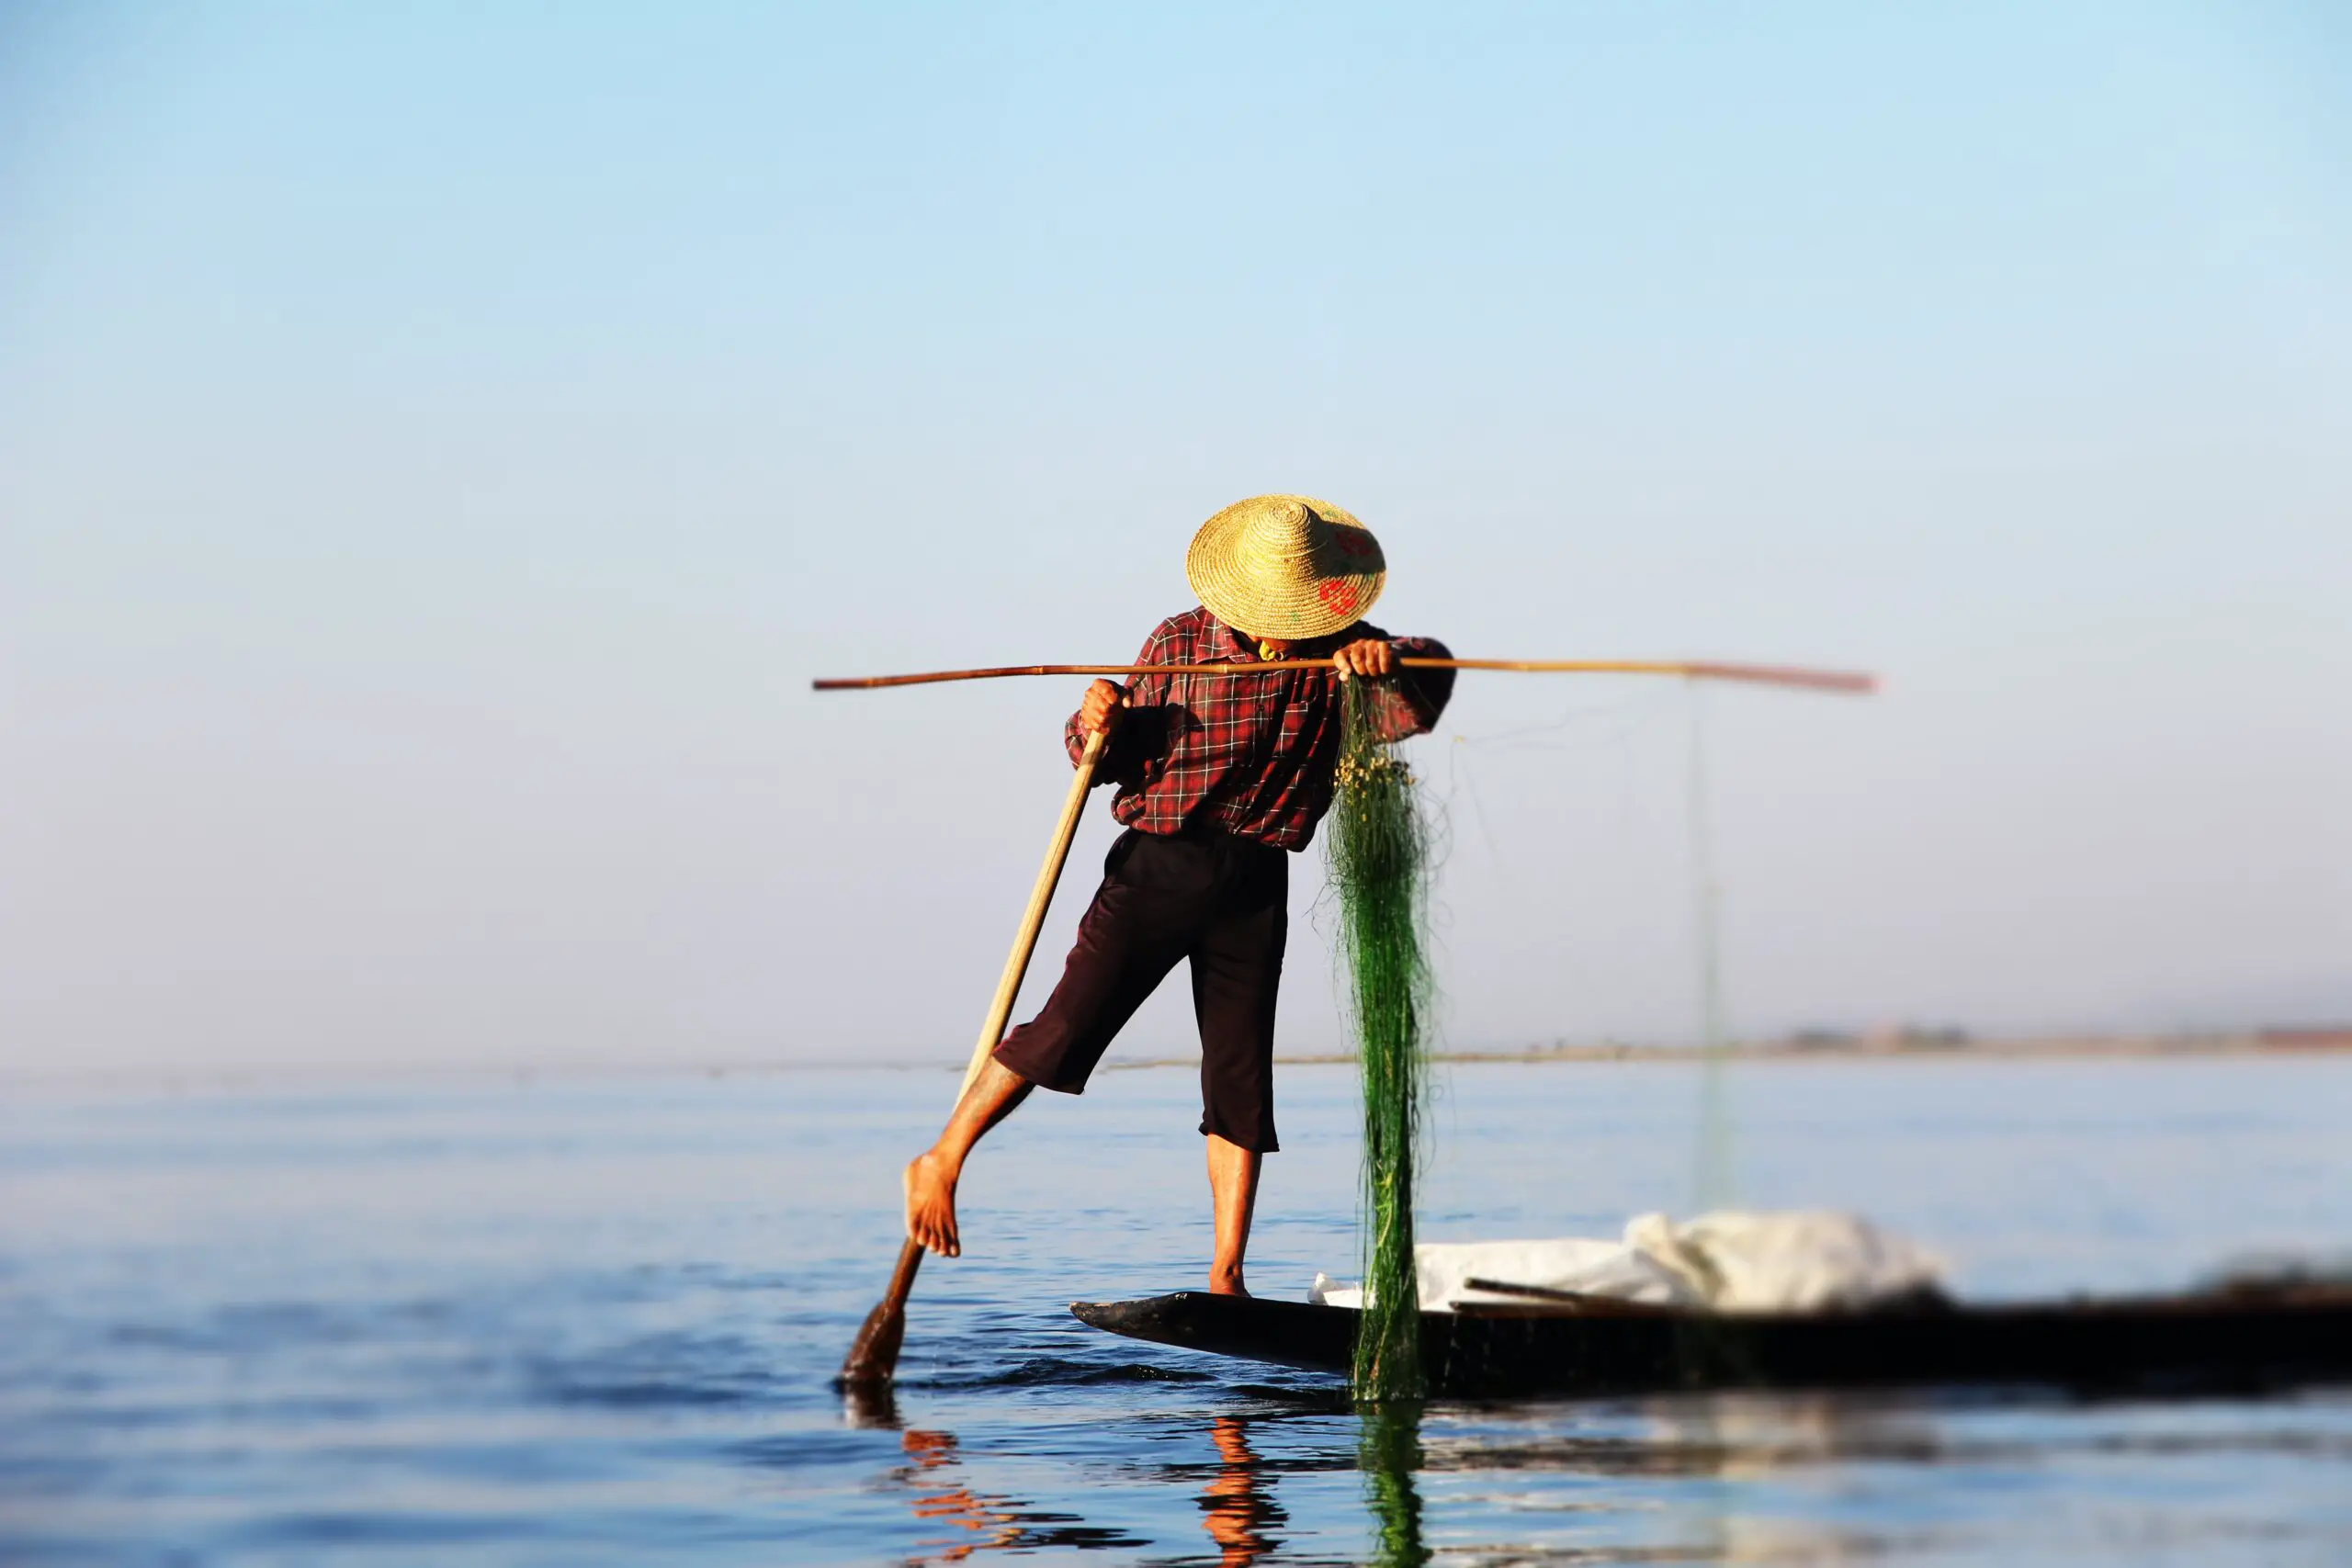 History of Stand Up Paddle Boarding – What is it? And where does it come from? Everything you need to know.